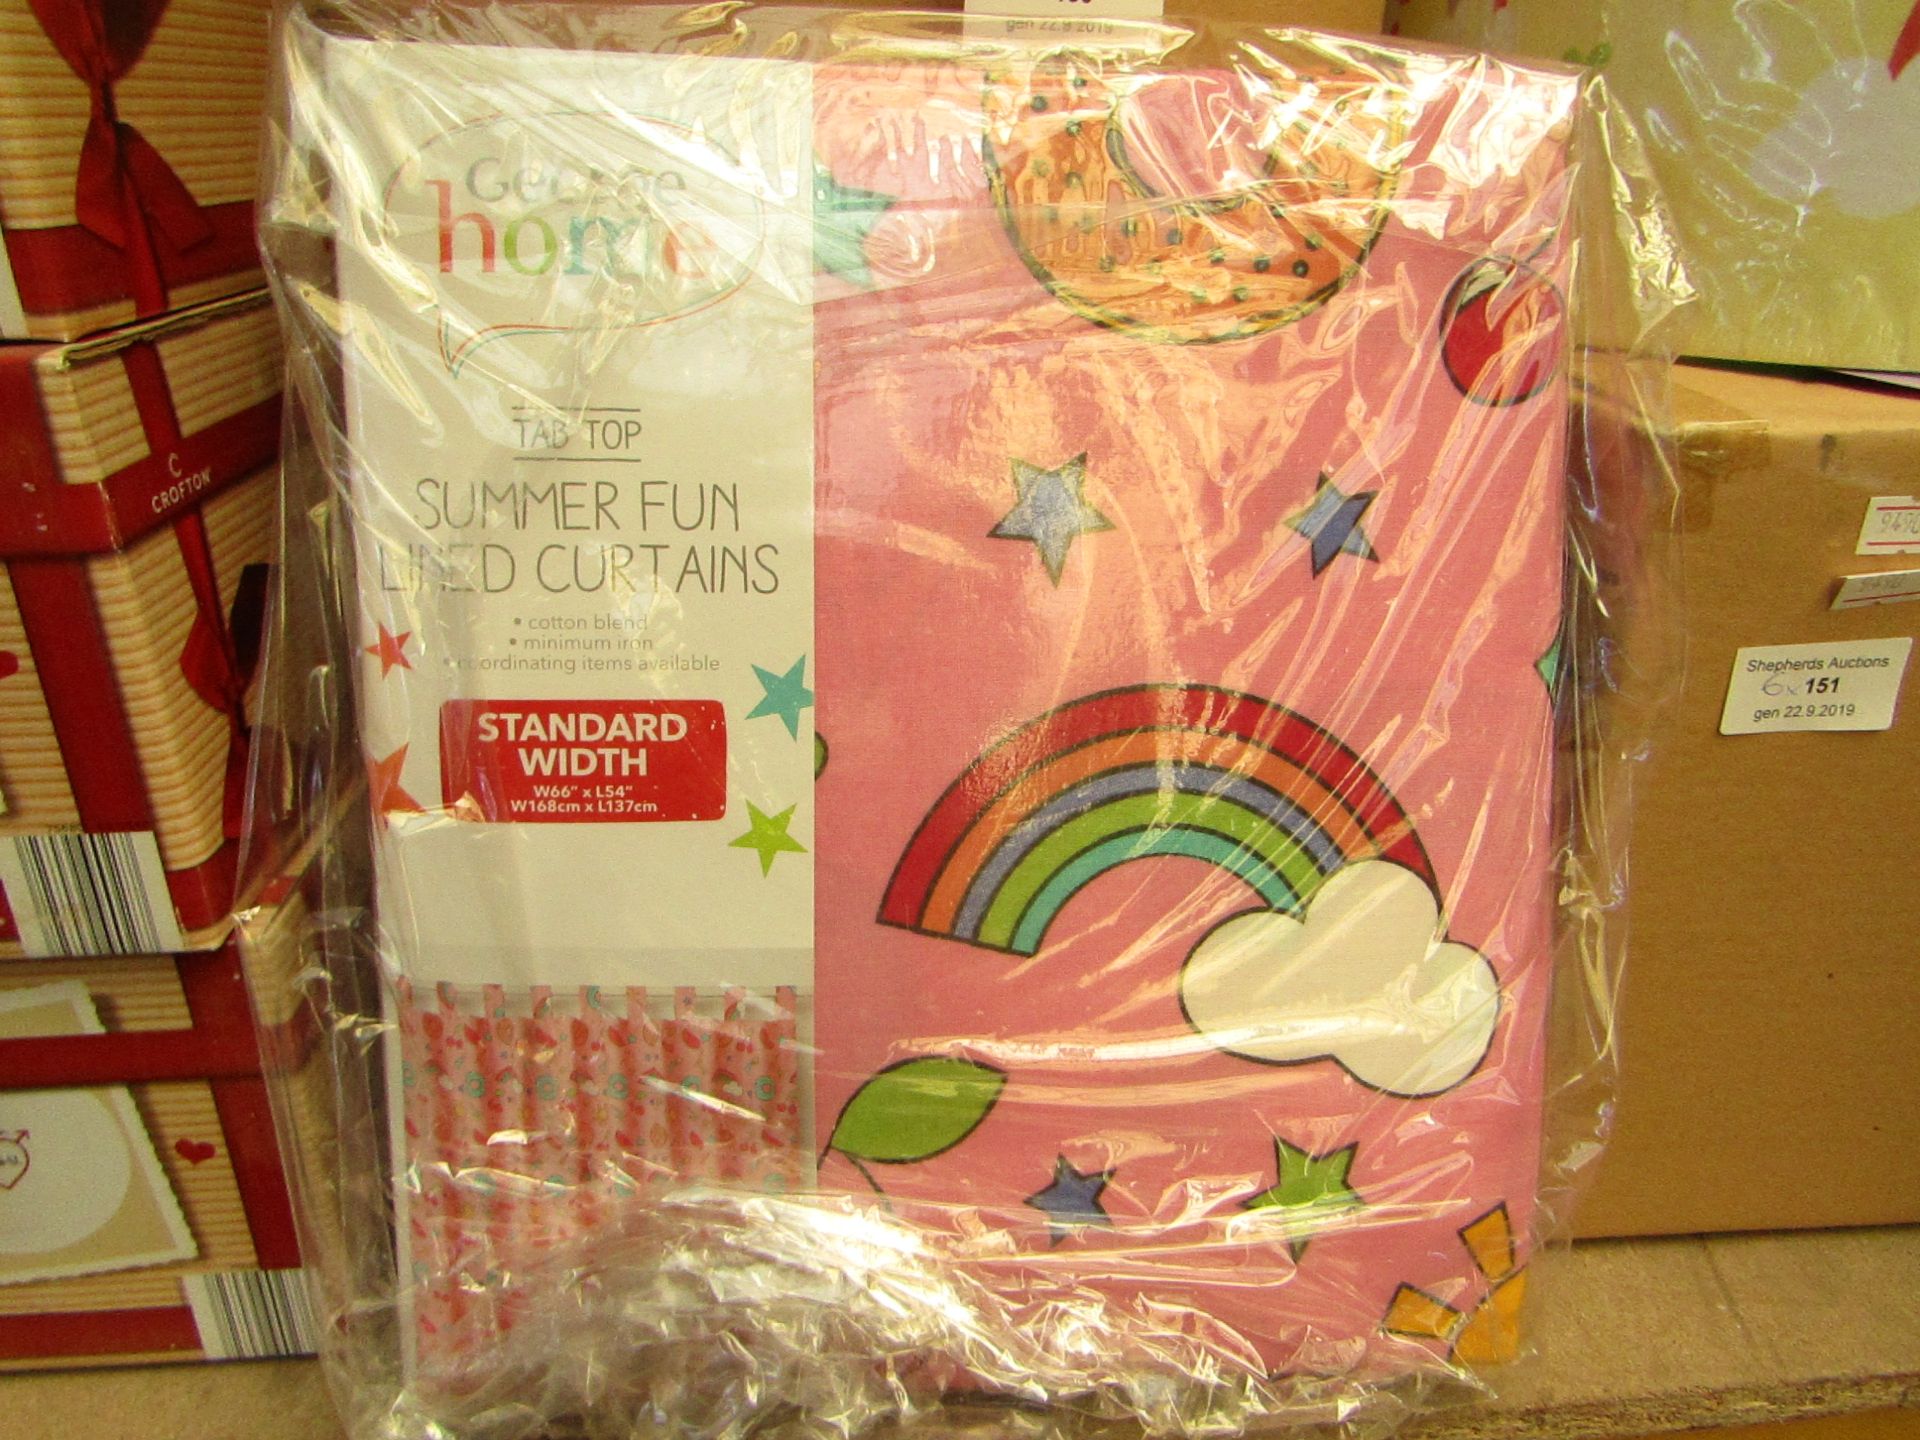 George Home Tab Top Summer Fun Lined Curtains.w66" l54".New & Packaged.See pic for design